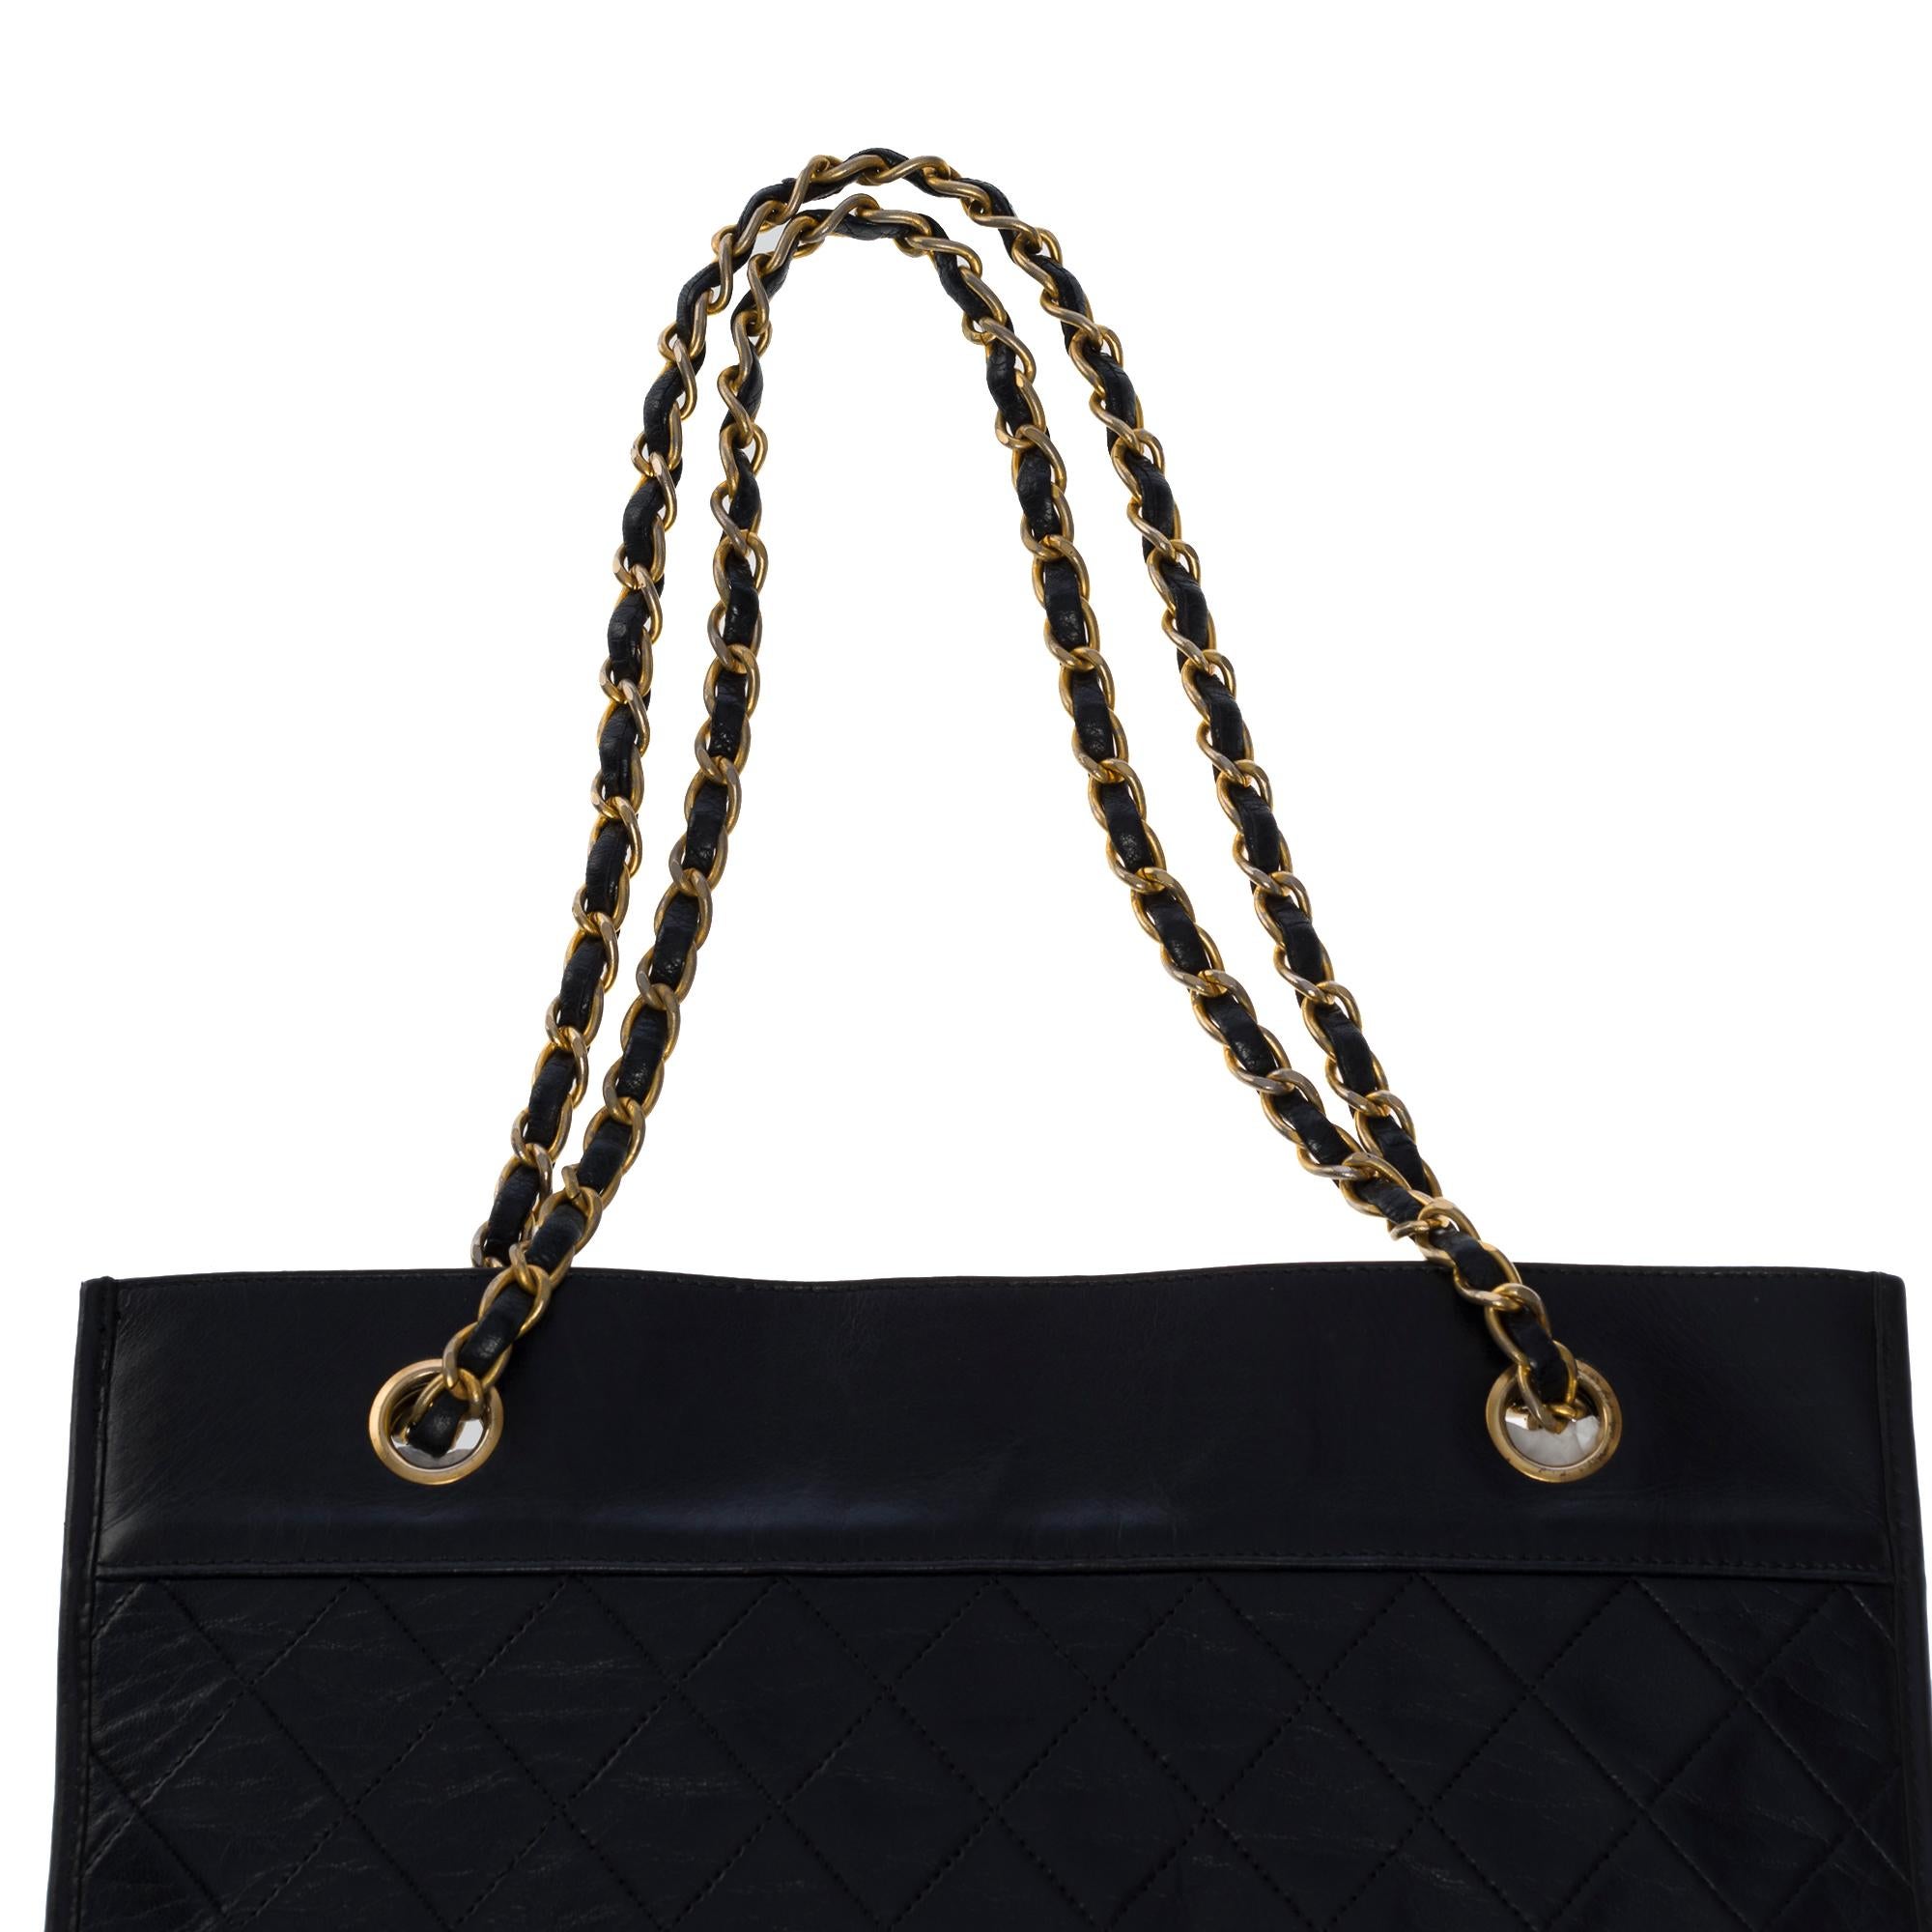 Gorgeous Chanel Flat Tote bag in black quilted lambskin leather , GHW 4